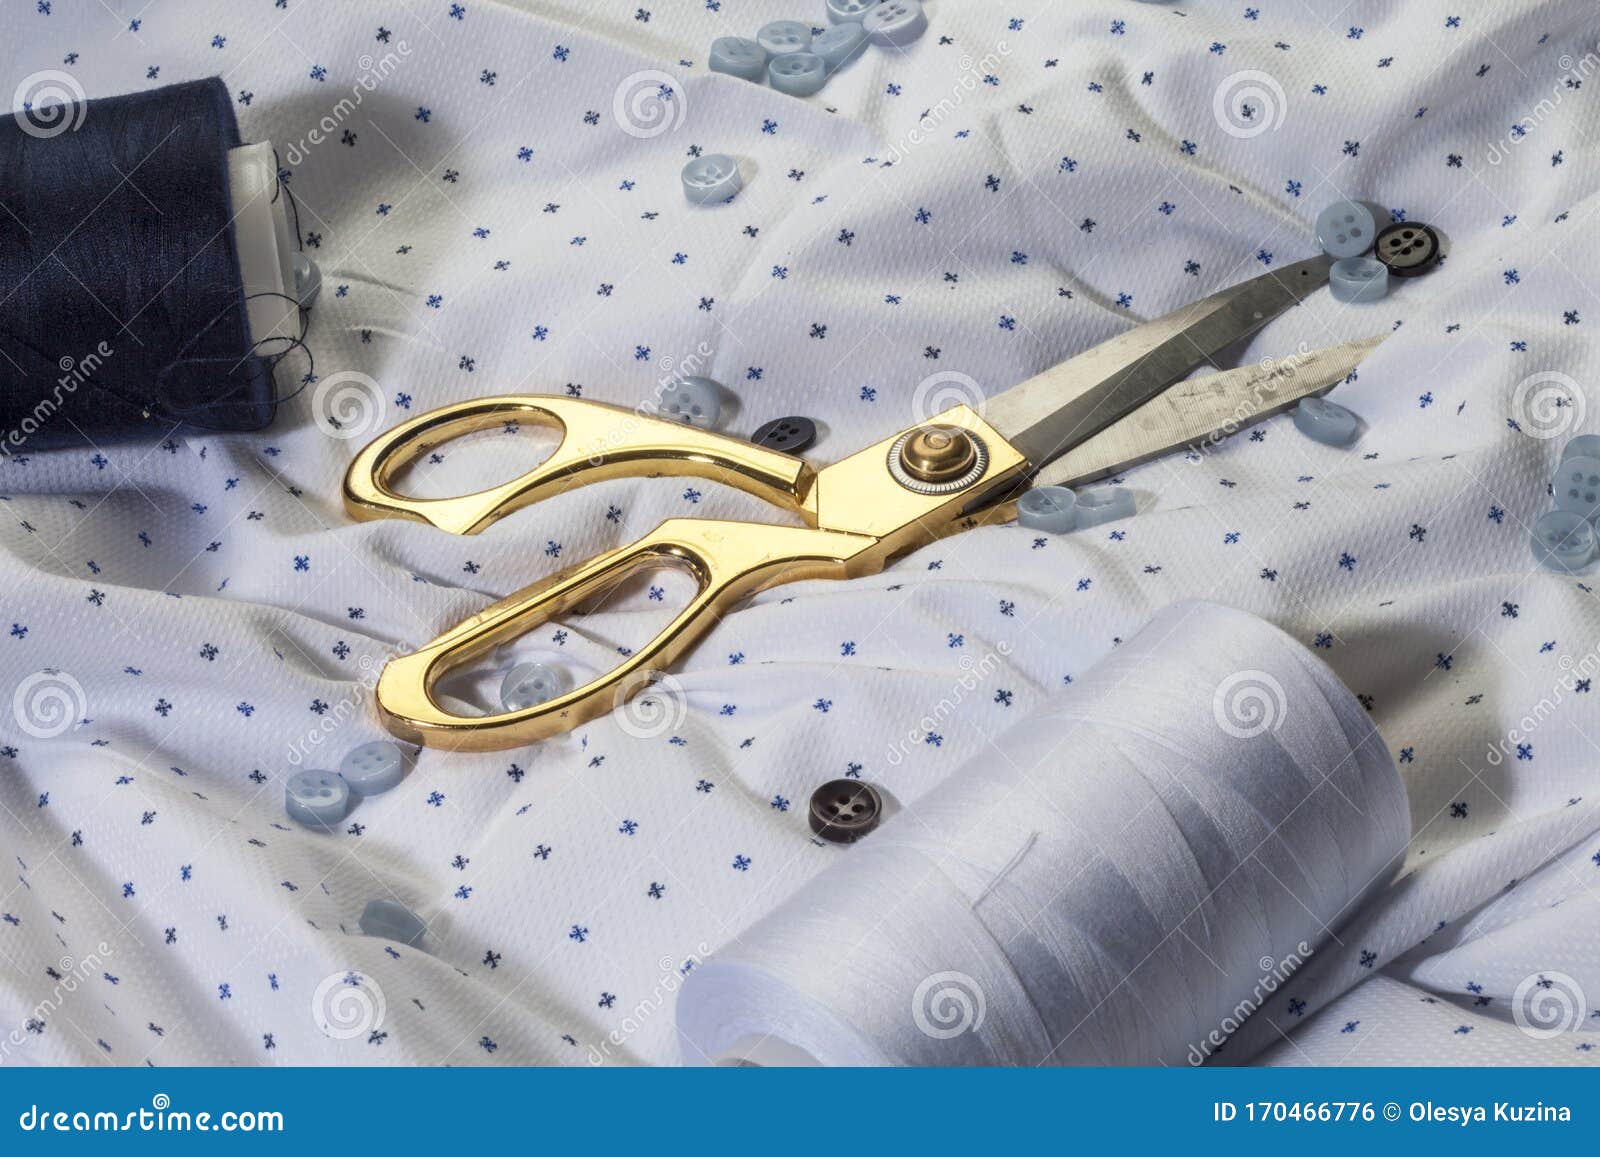 https://thumbs.dreamstime.com/z/fabric-sewing-clothes-items-sewing-clothes-centimeter-tape-tailoring-scissors-thread-zipper-blue-fabric-sewing-170466776.jpg